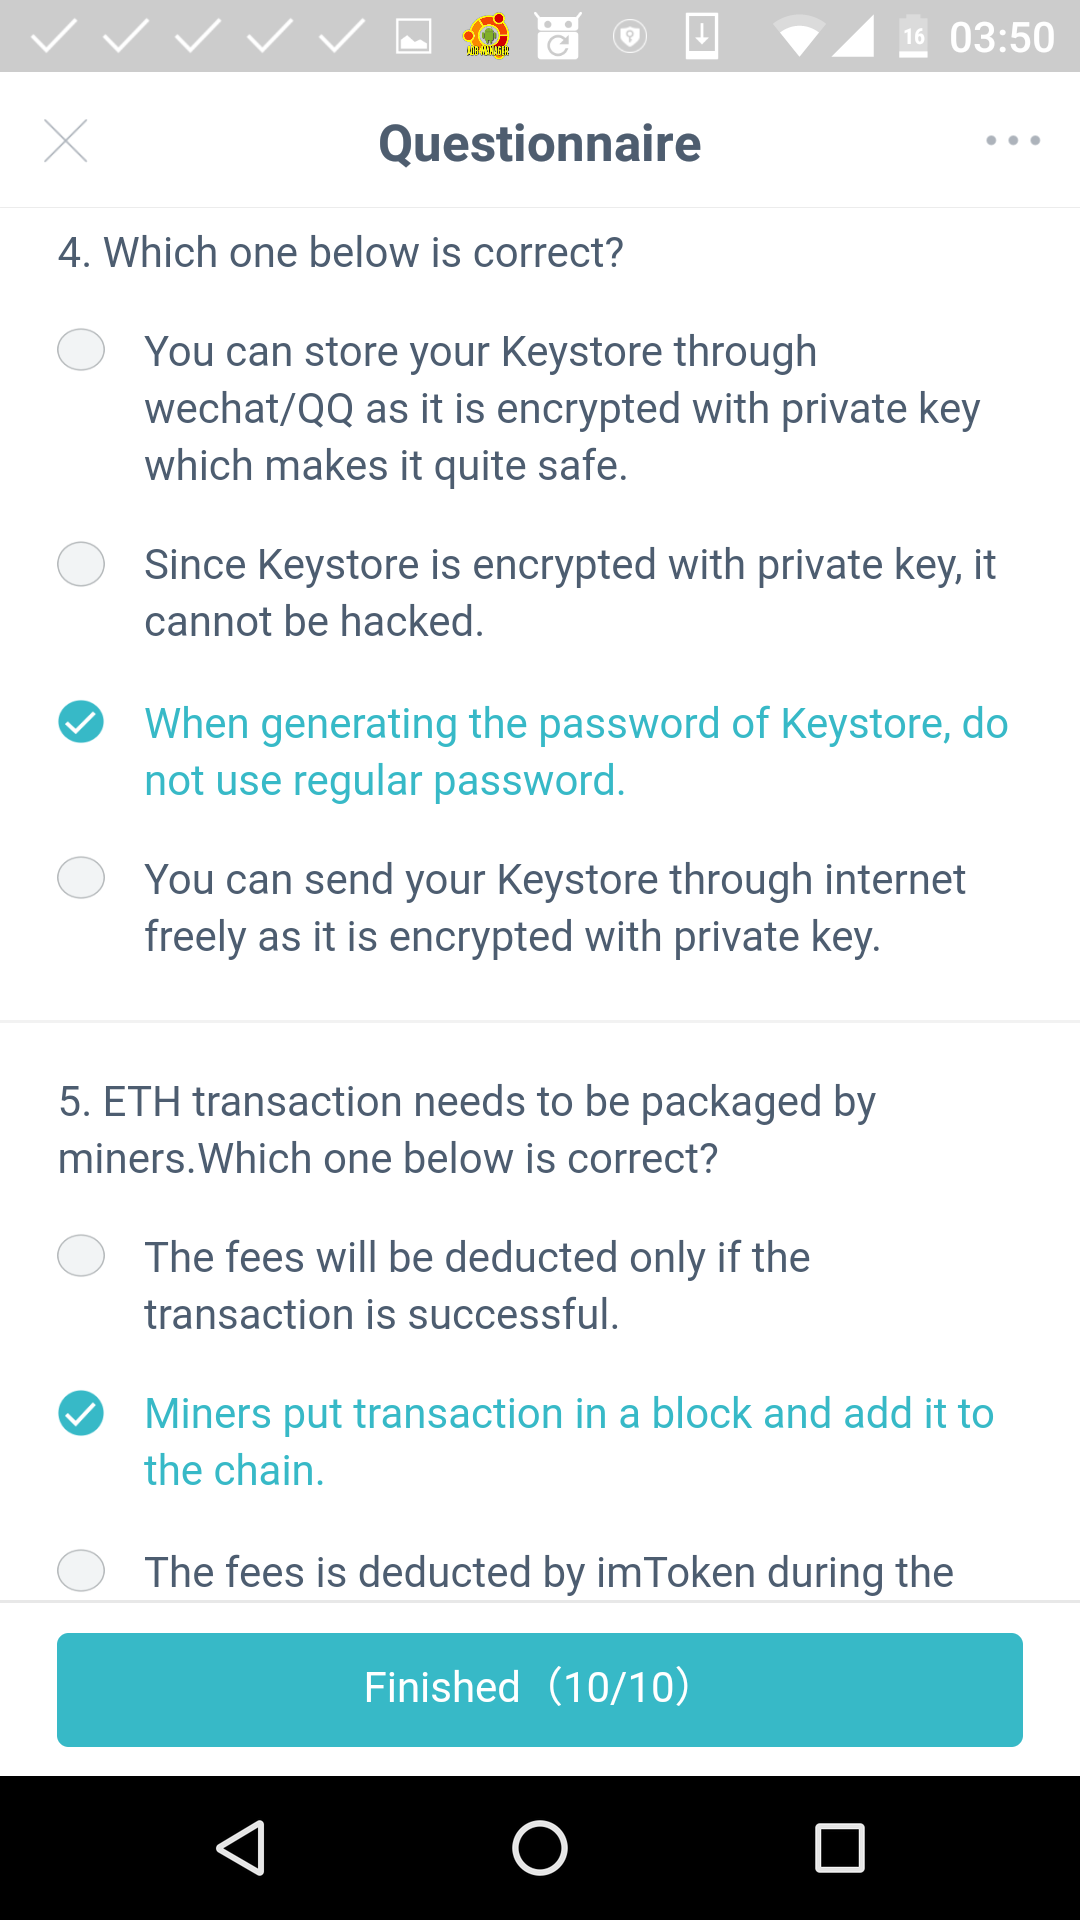 4. When generating the password of Keystore, do not use regular password. 5. Miners put transaction in a block and add it to the chain.